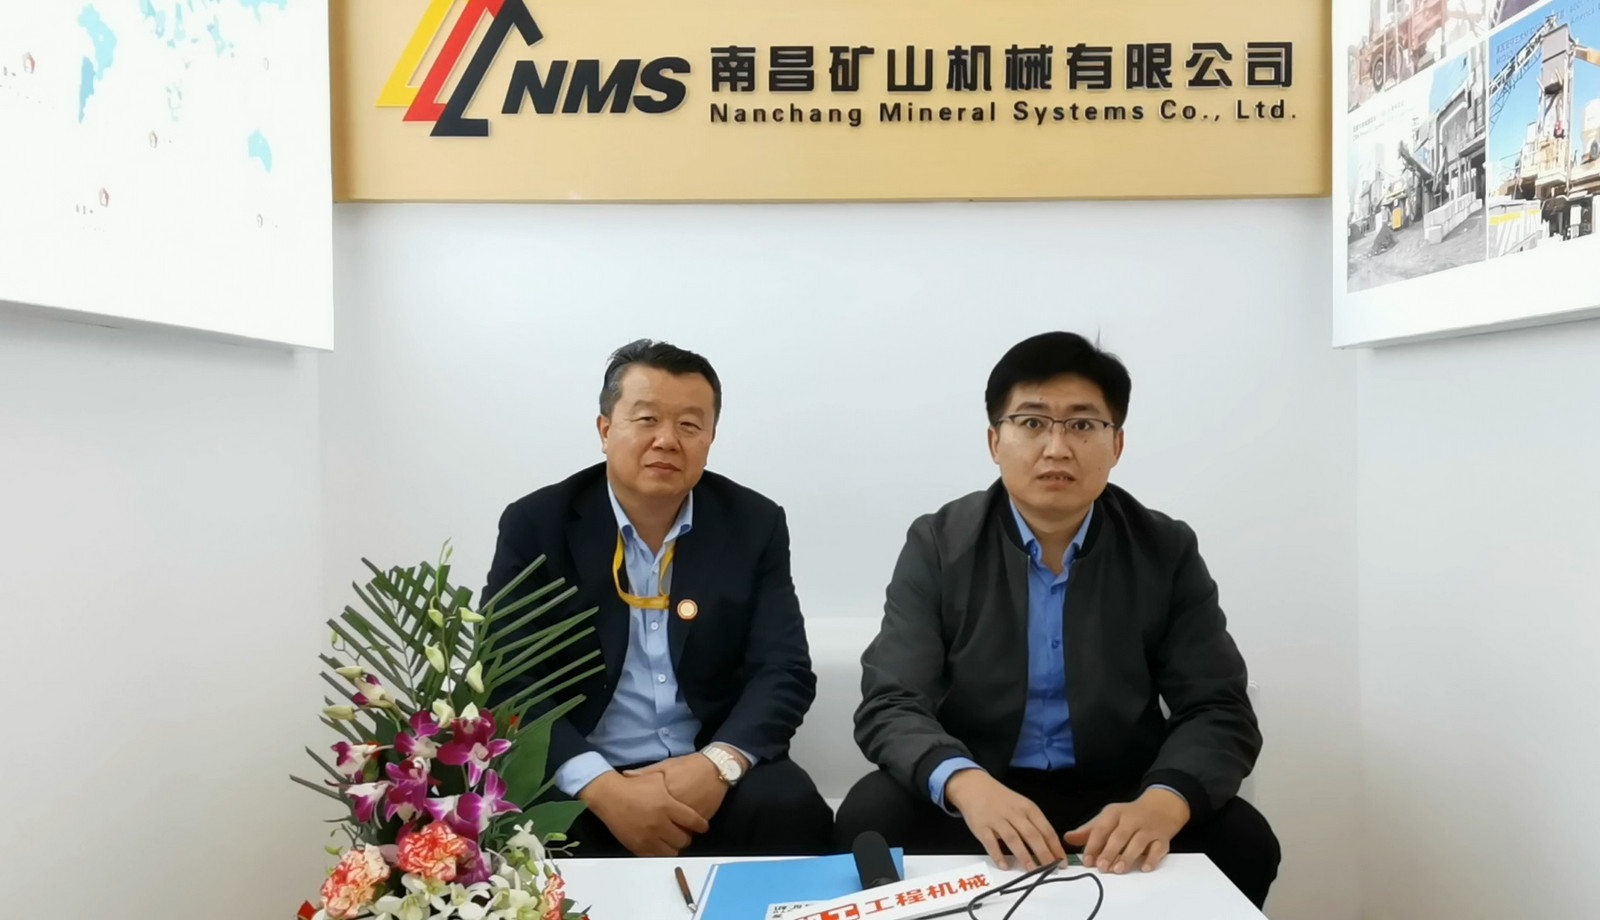 Interview for NMS President Gong Youliang by China Machinery Industry Information Institute